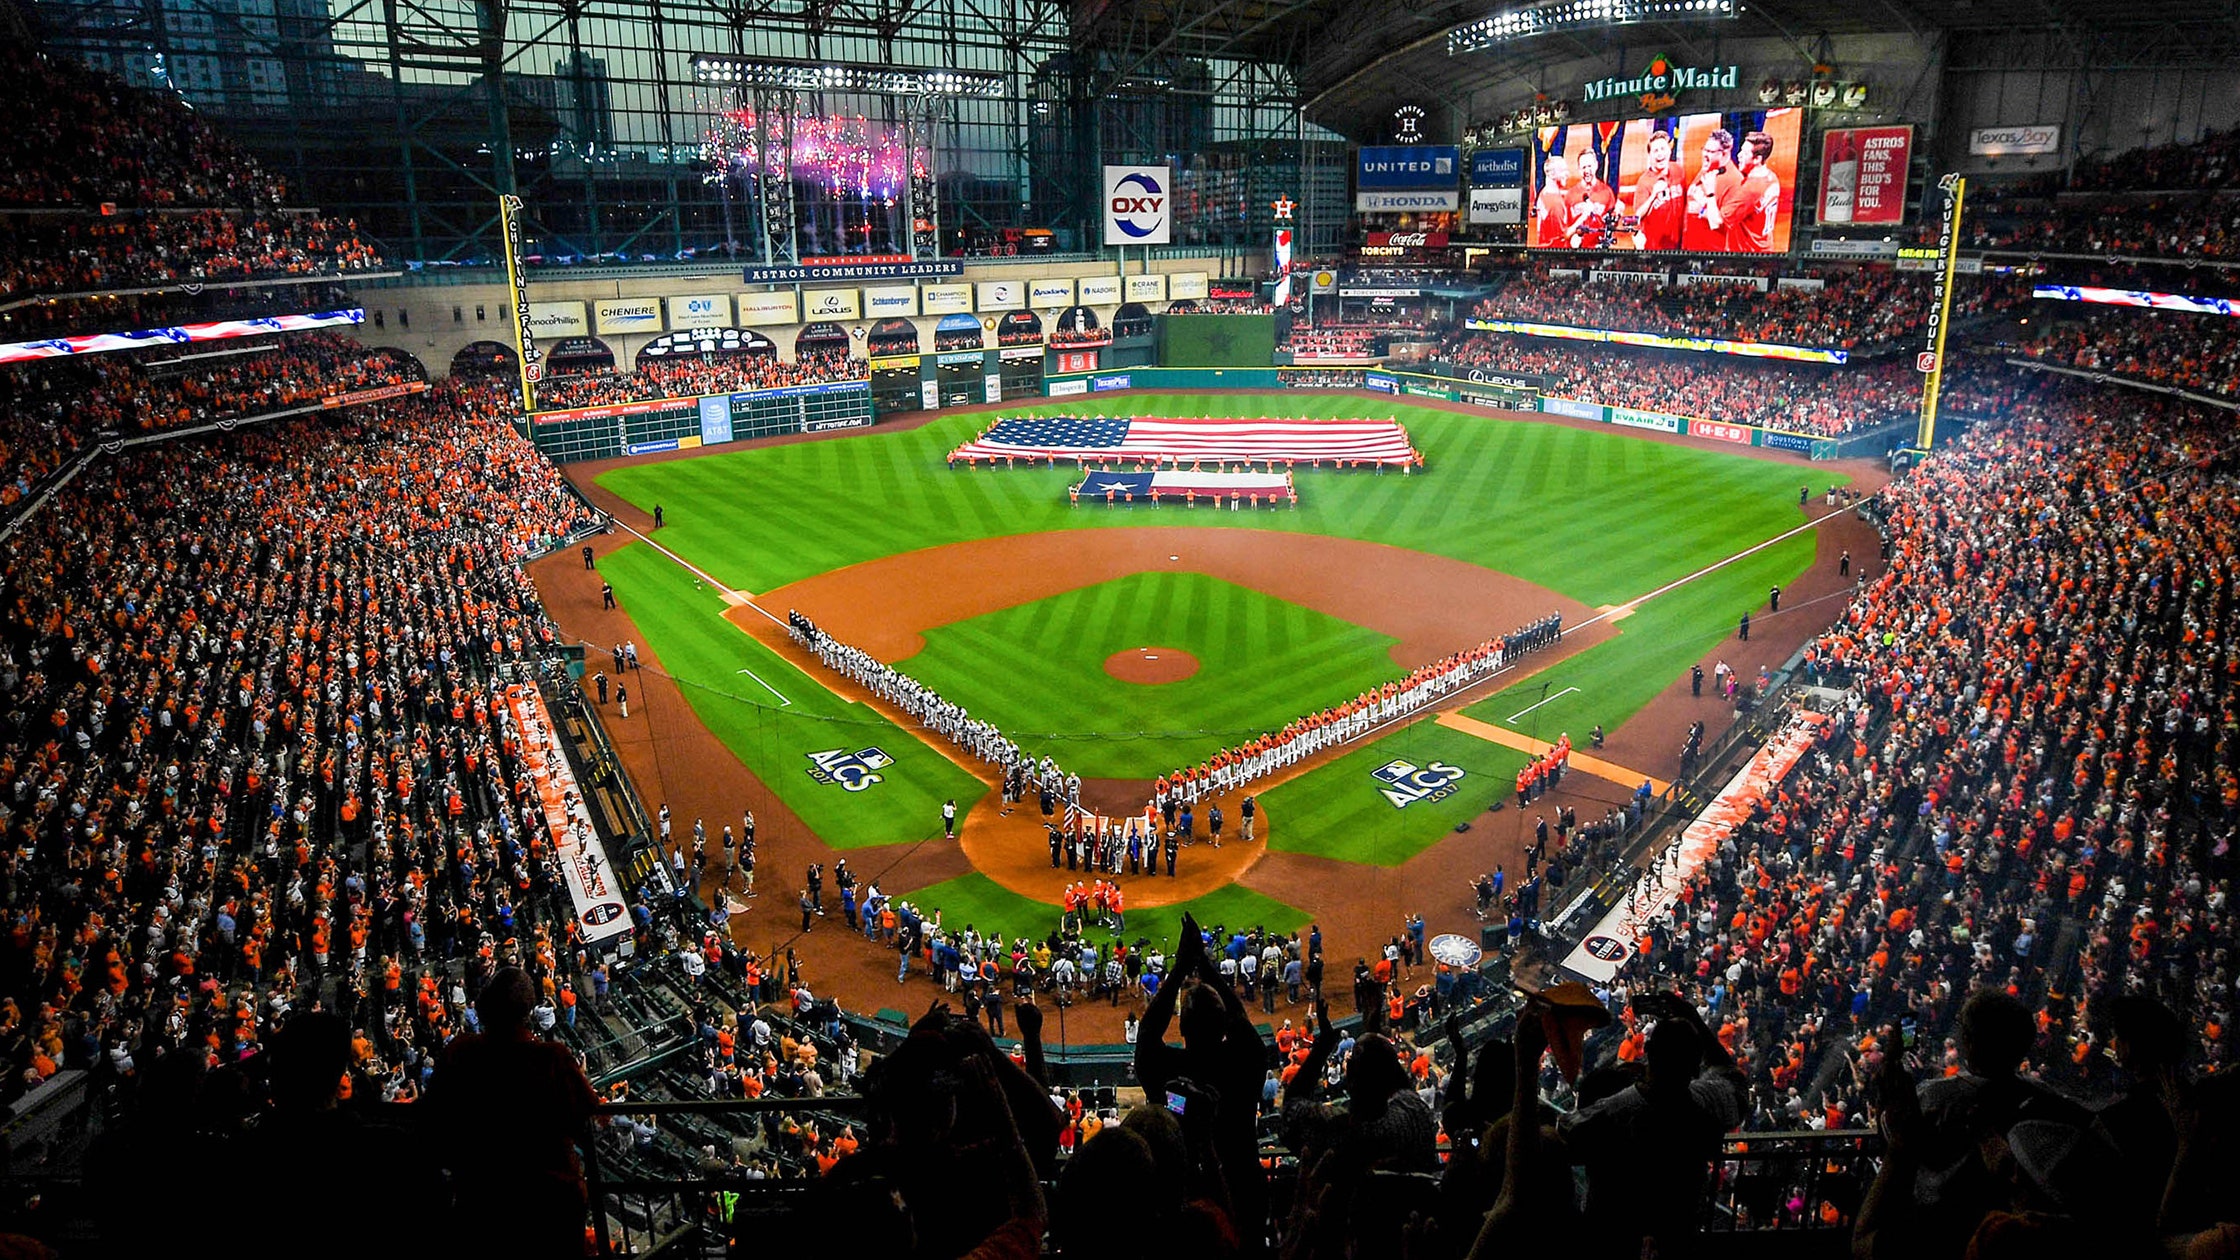 Minute Maid Park: Home of the Houston Astros